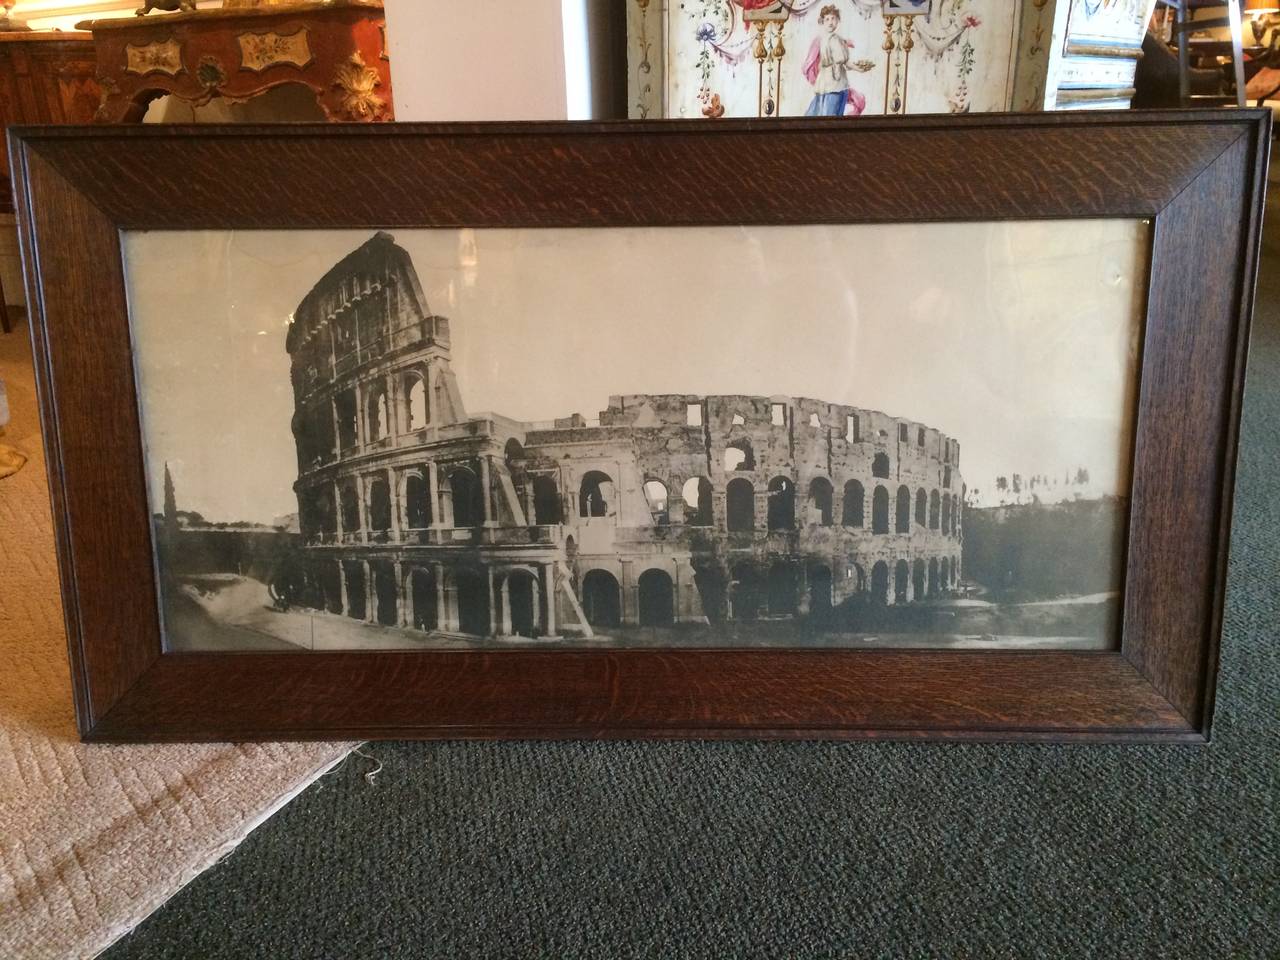 Fantastic large-scale sepia photograph of the Roman Coliseum in the original oak frame with the original glass.